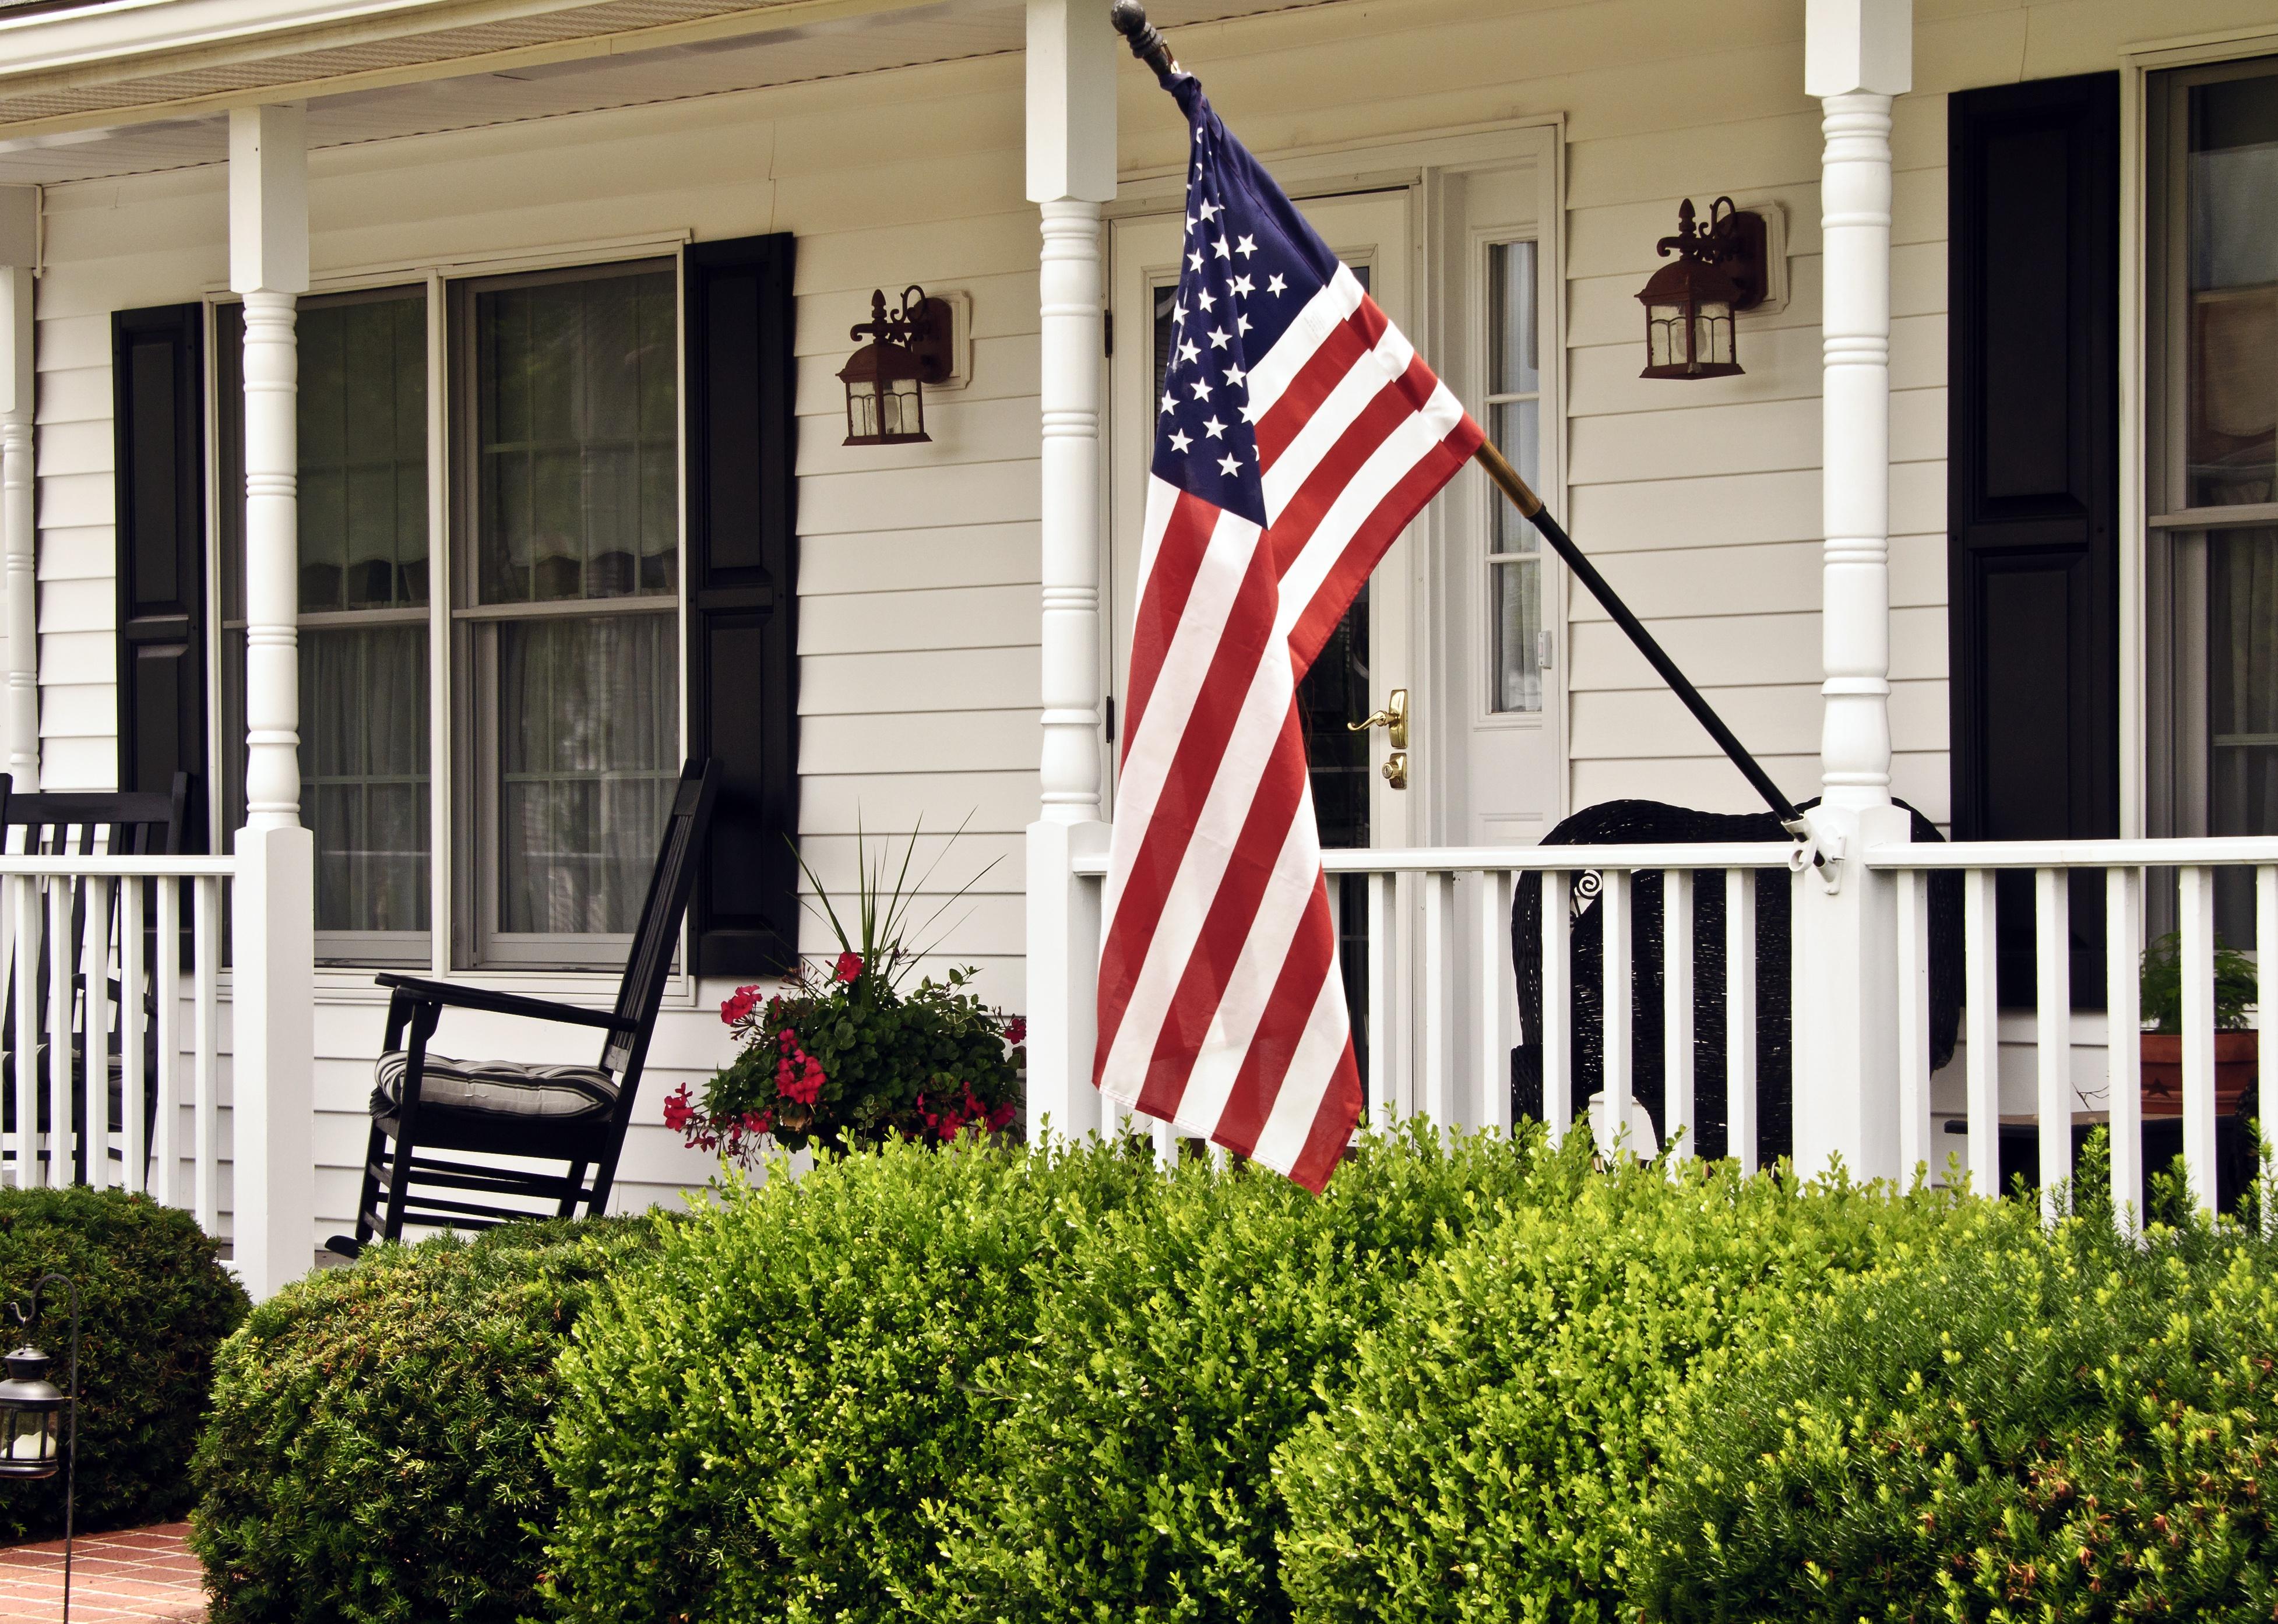 Porch of white colonial home with black shutters and an American flag.